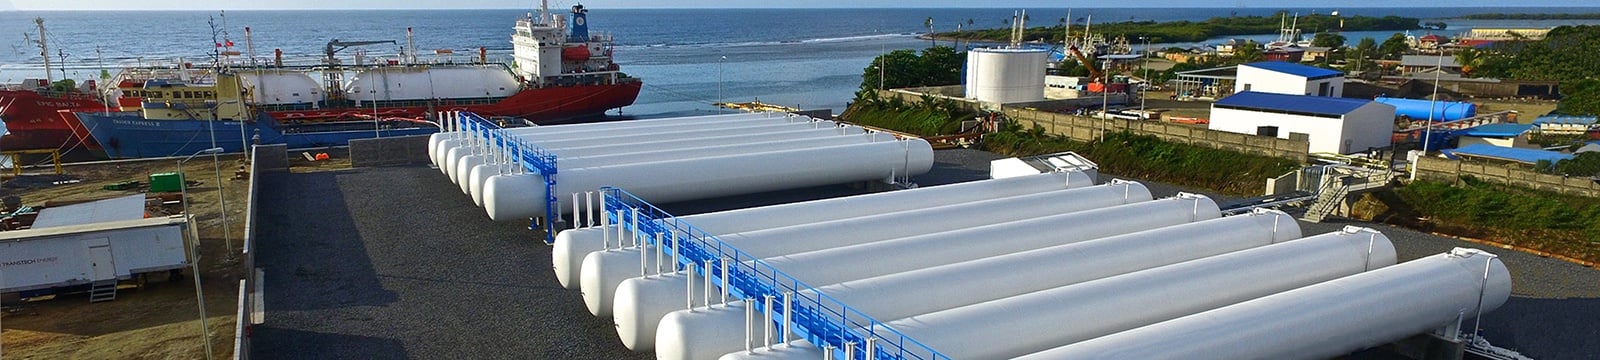 NGL LPG Propane Butane Marine Import Terminals for Ship & Barge Unloading - Engineering Construction Services EPC_.jpg